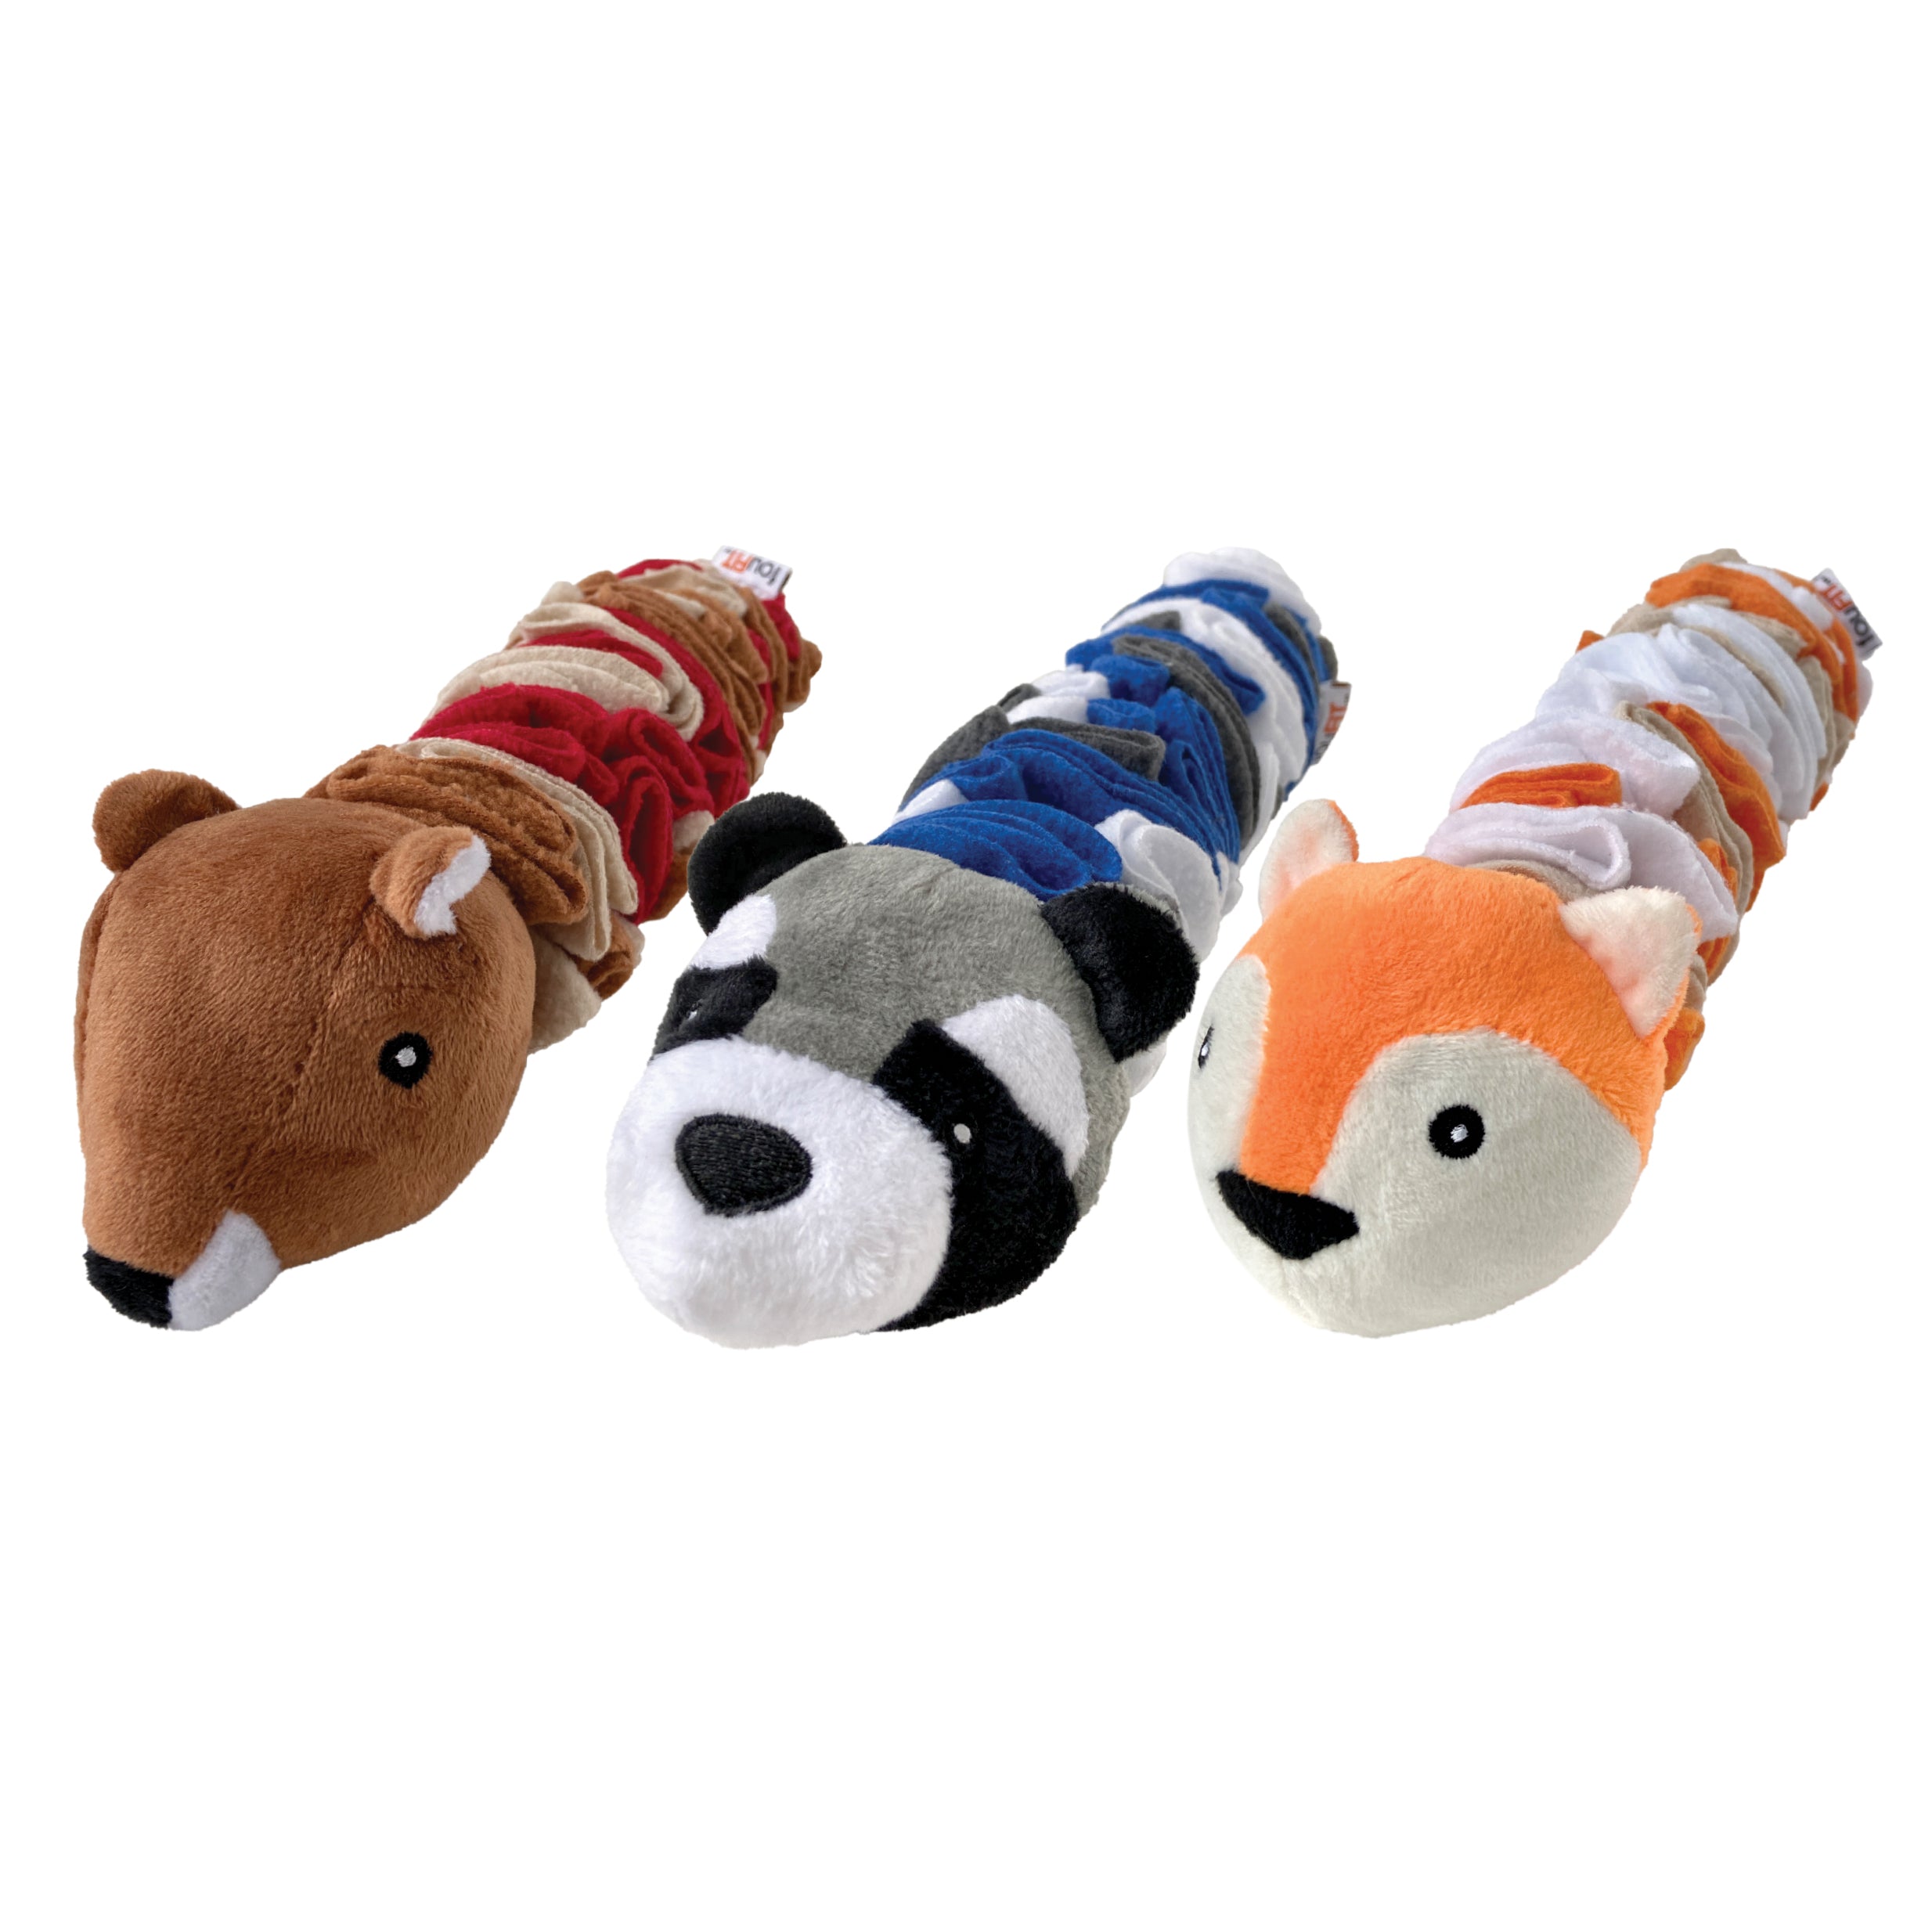 Snuffle Toys  Manneke's Toys